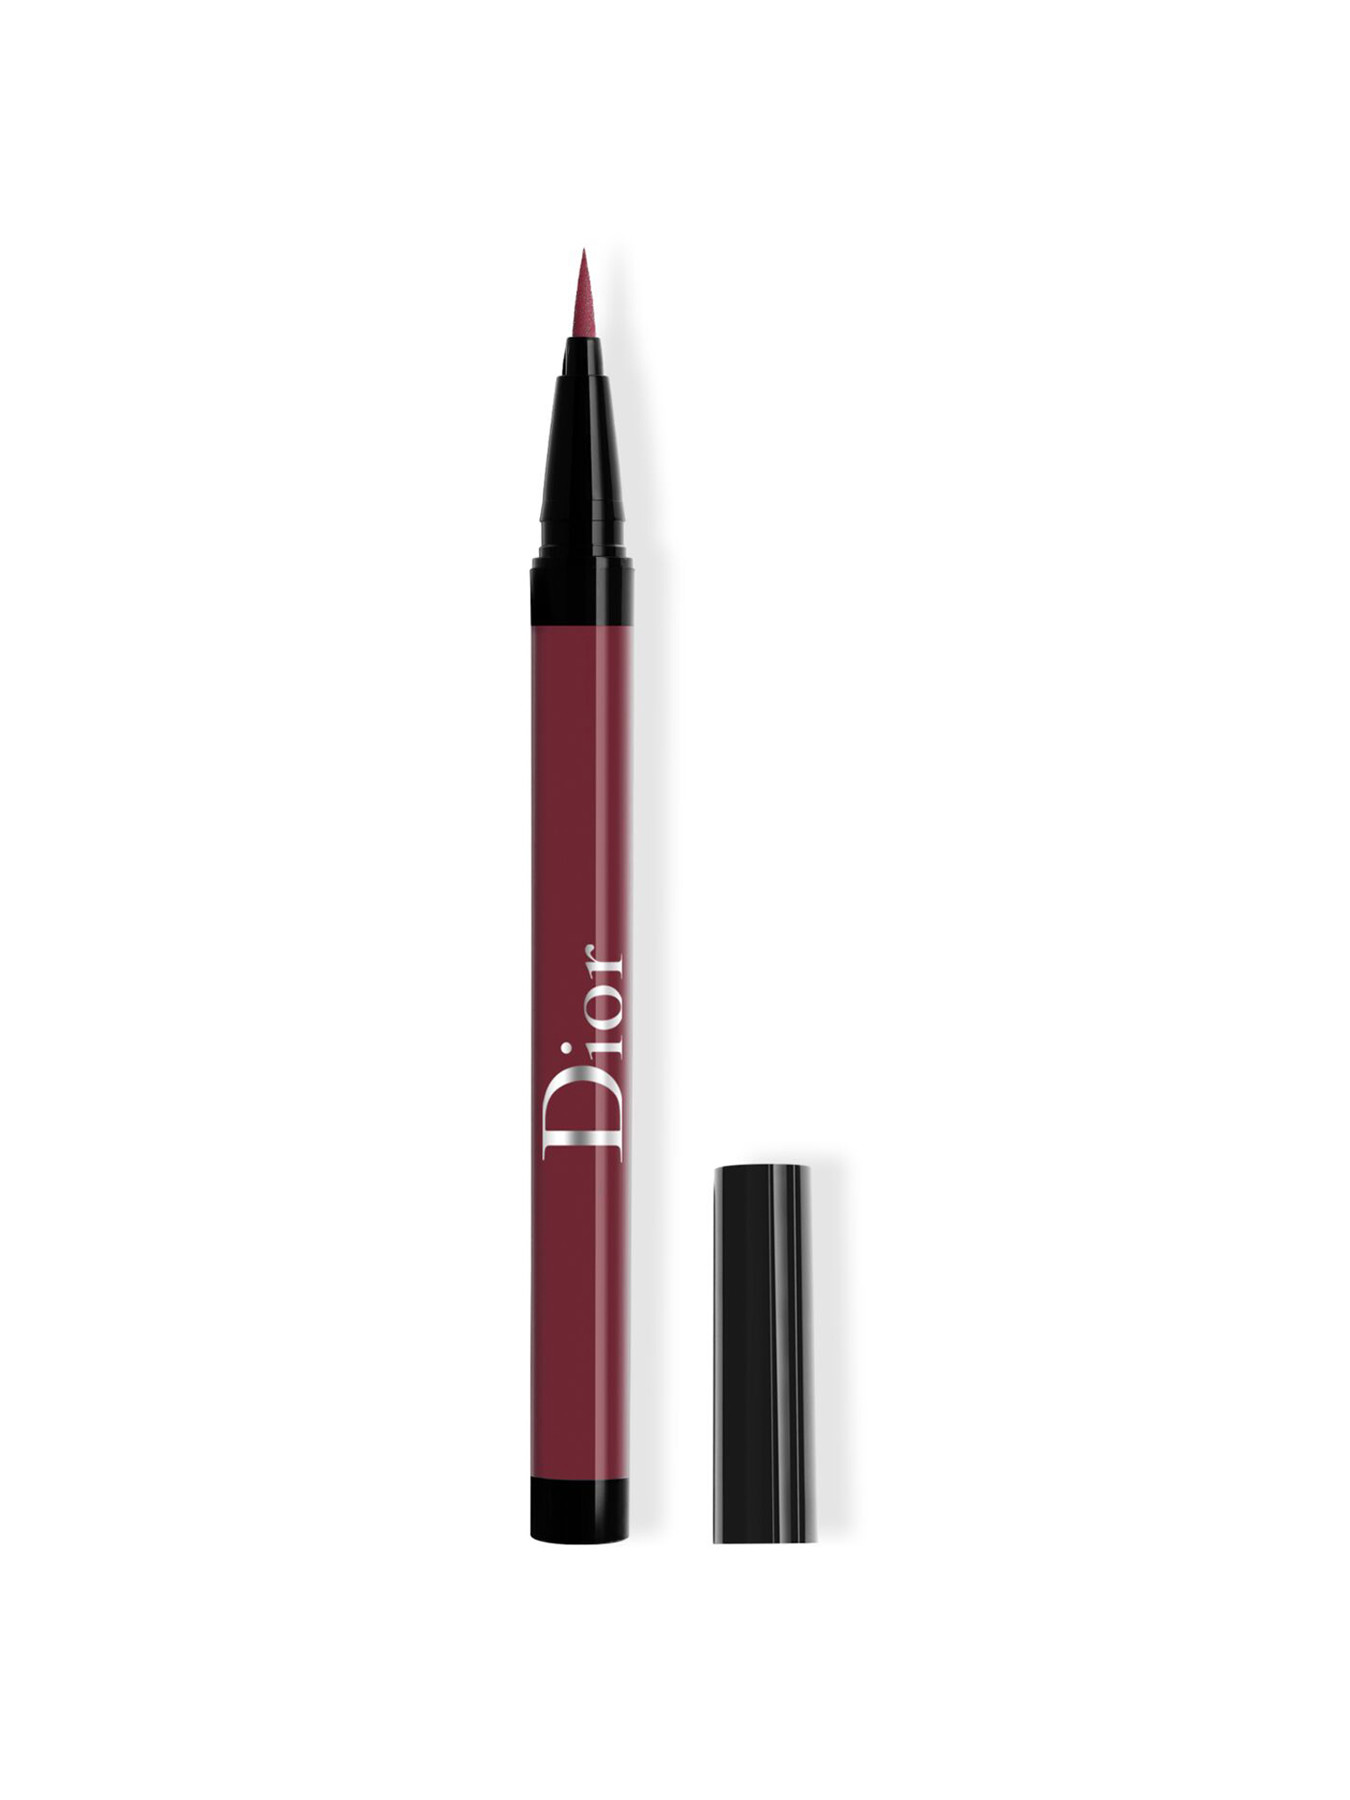 Dior Show On Stage Liner Satin Maroon